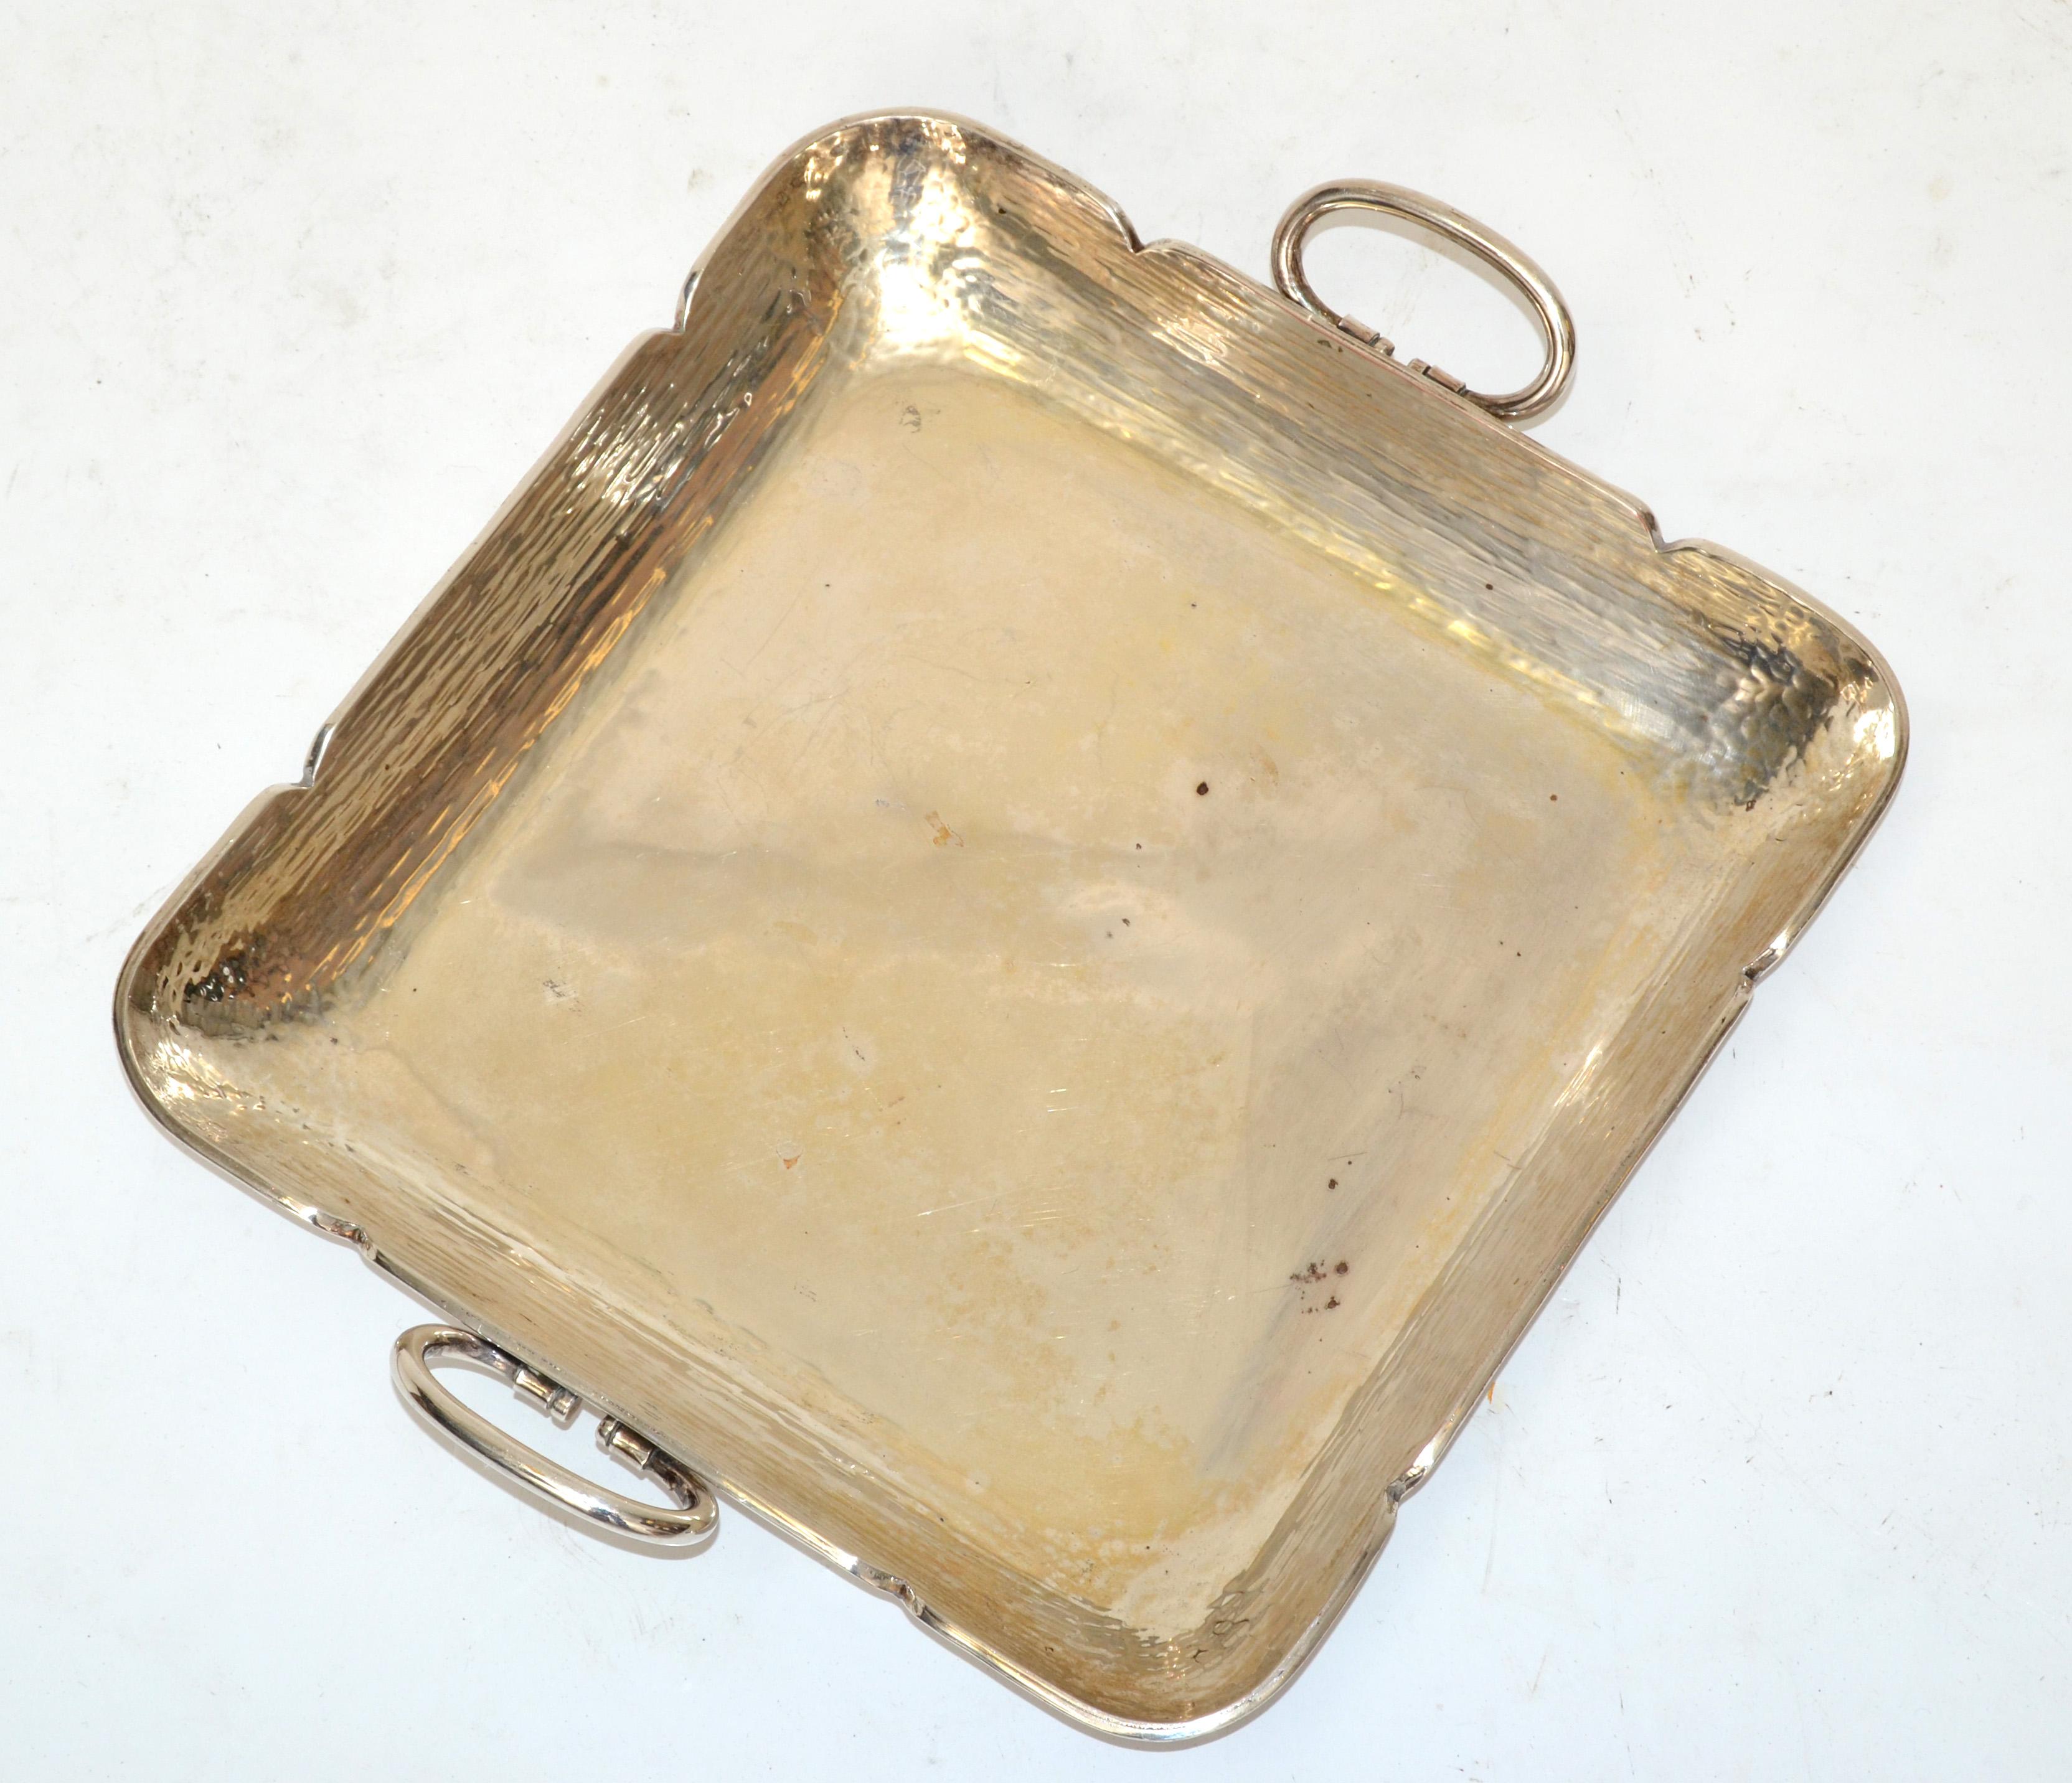 Square decorative serving tray made out of hammered cutout steel and silver plate handles.
Mid-Century Modern Design made in America in the early 1970s.
In pristine vintage condition with some spotting to the Metal & tarnish to the Silver Plate.